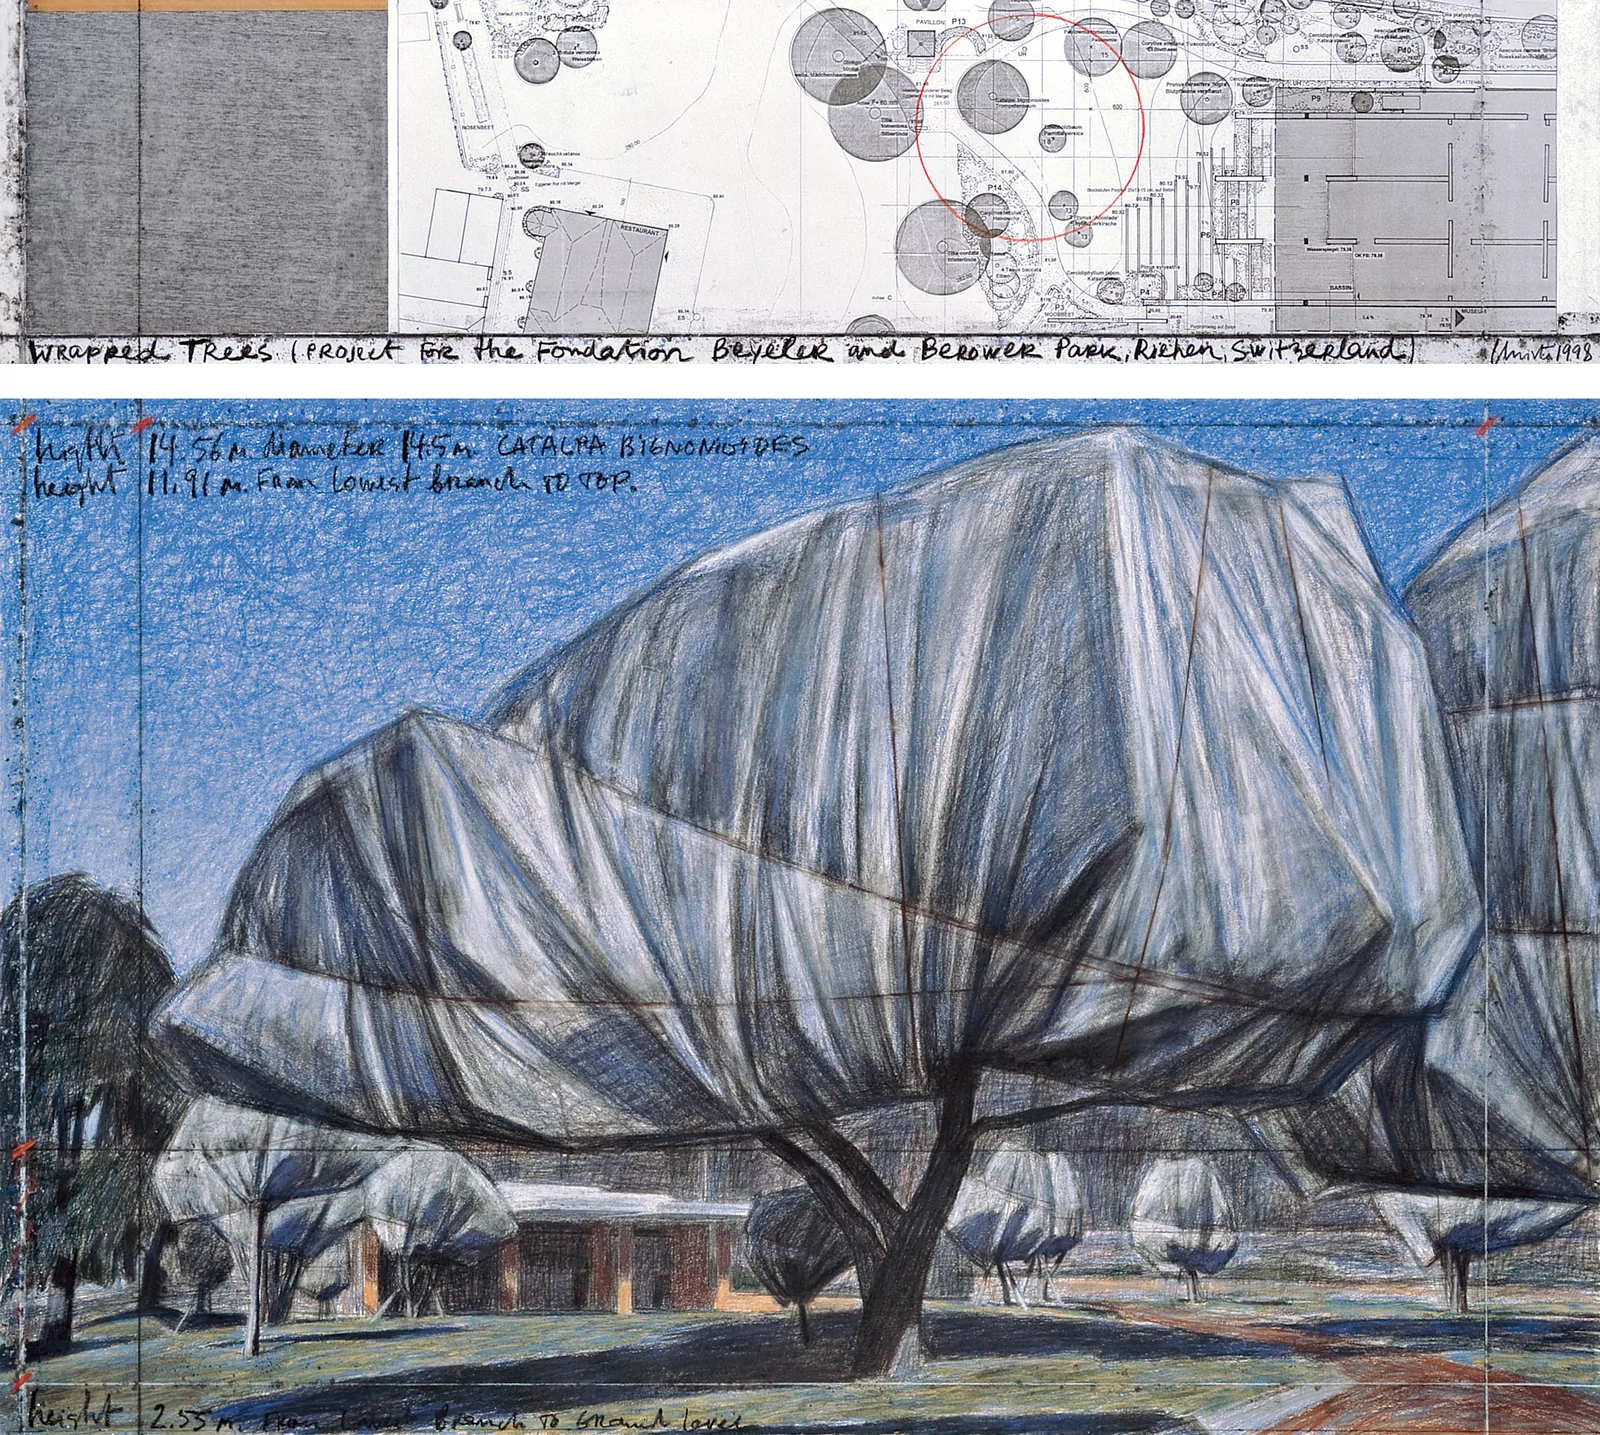 Christo Wrapped Trees (Project for the Fondation Beyeler and Berower Park, Riehen, Switzerland) Drawing 1998 in two parts Pencil, charcoal, pastel, wax crayon, fabric sample, technical data, topographic map, and tape 38 x 165 cm and 106.6 x 165 cm (15 x 65 in and 42 x 65 in) — Fondation Beyeler, Riehen, Switzerland Photo: André Grossmann © 1998 Christo and Jeanne-Claude Foundation